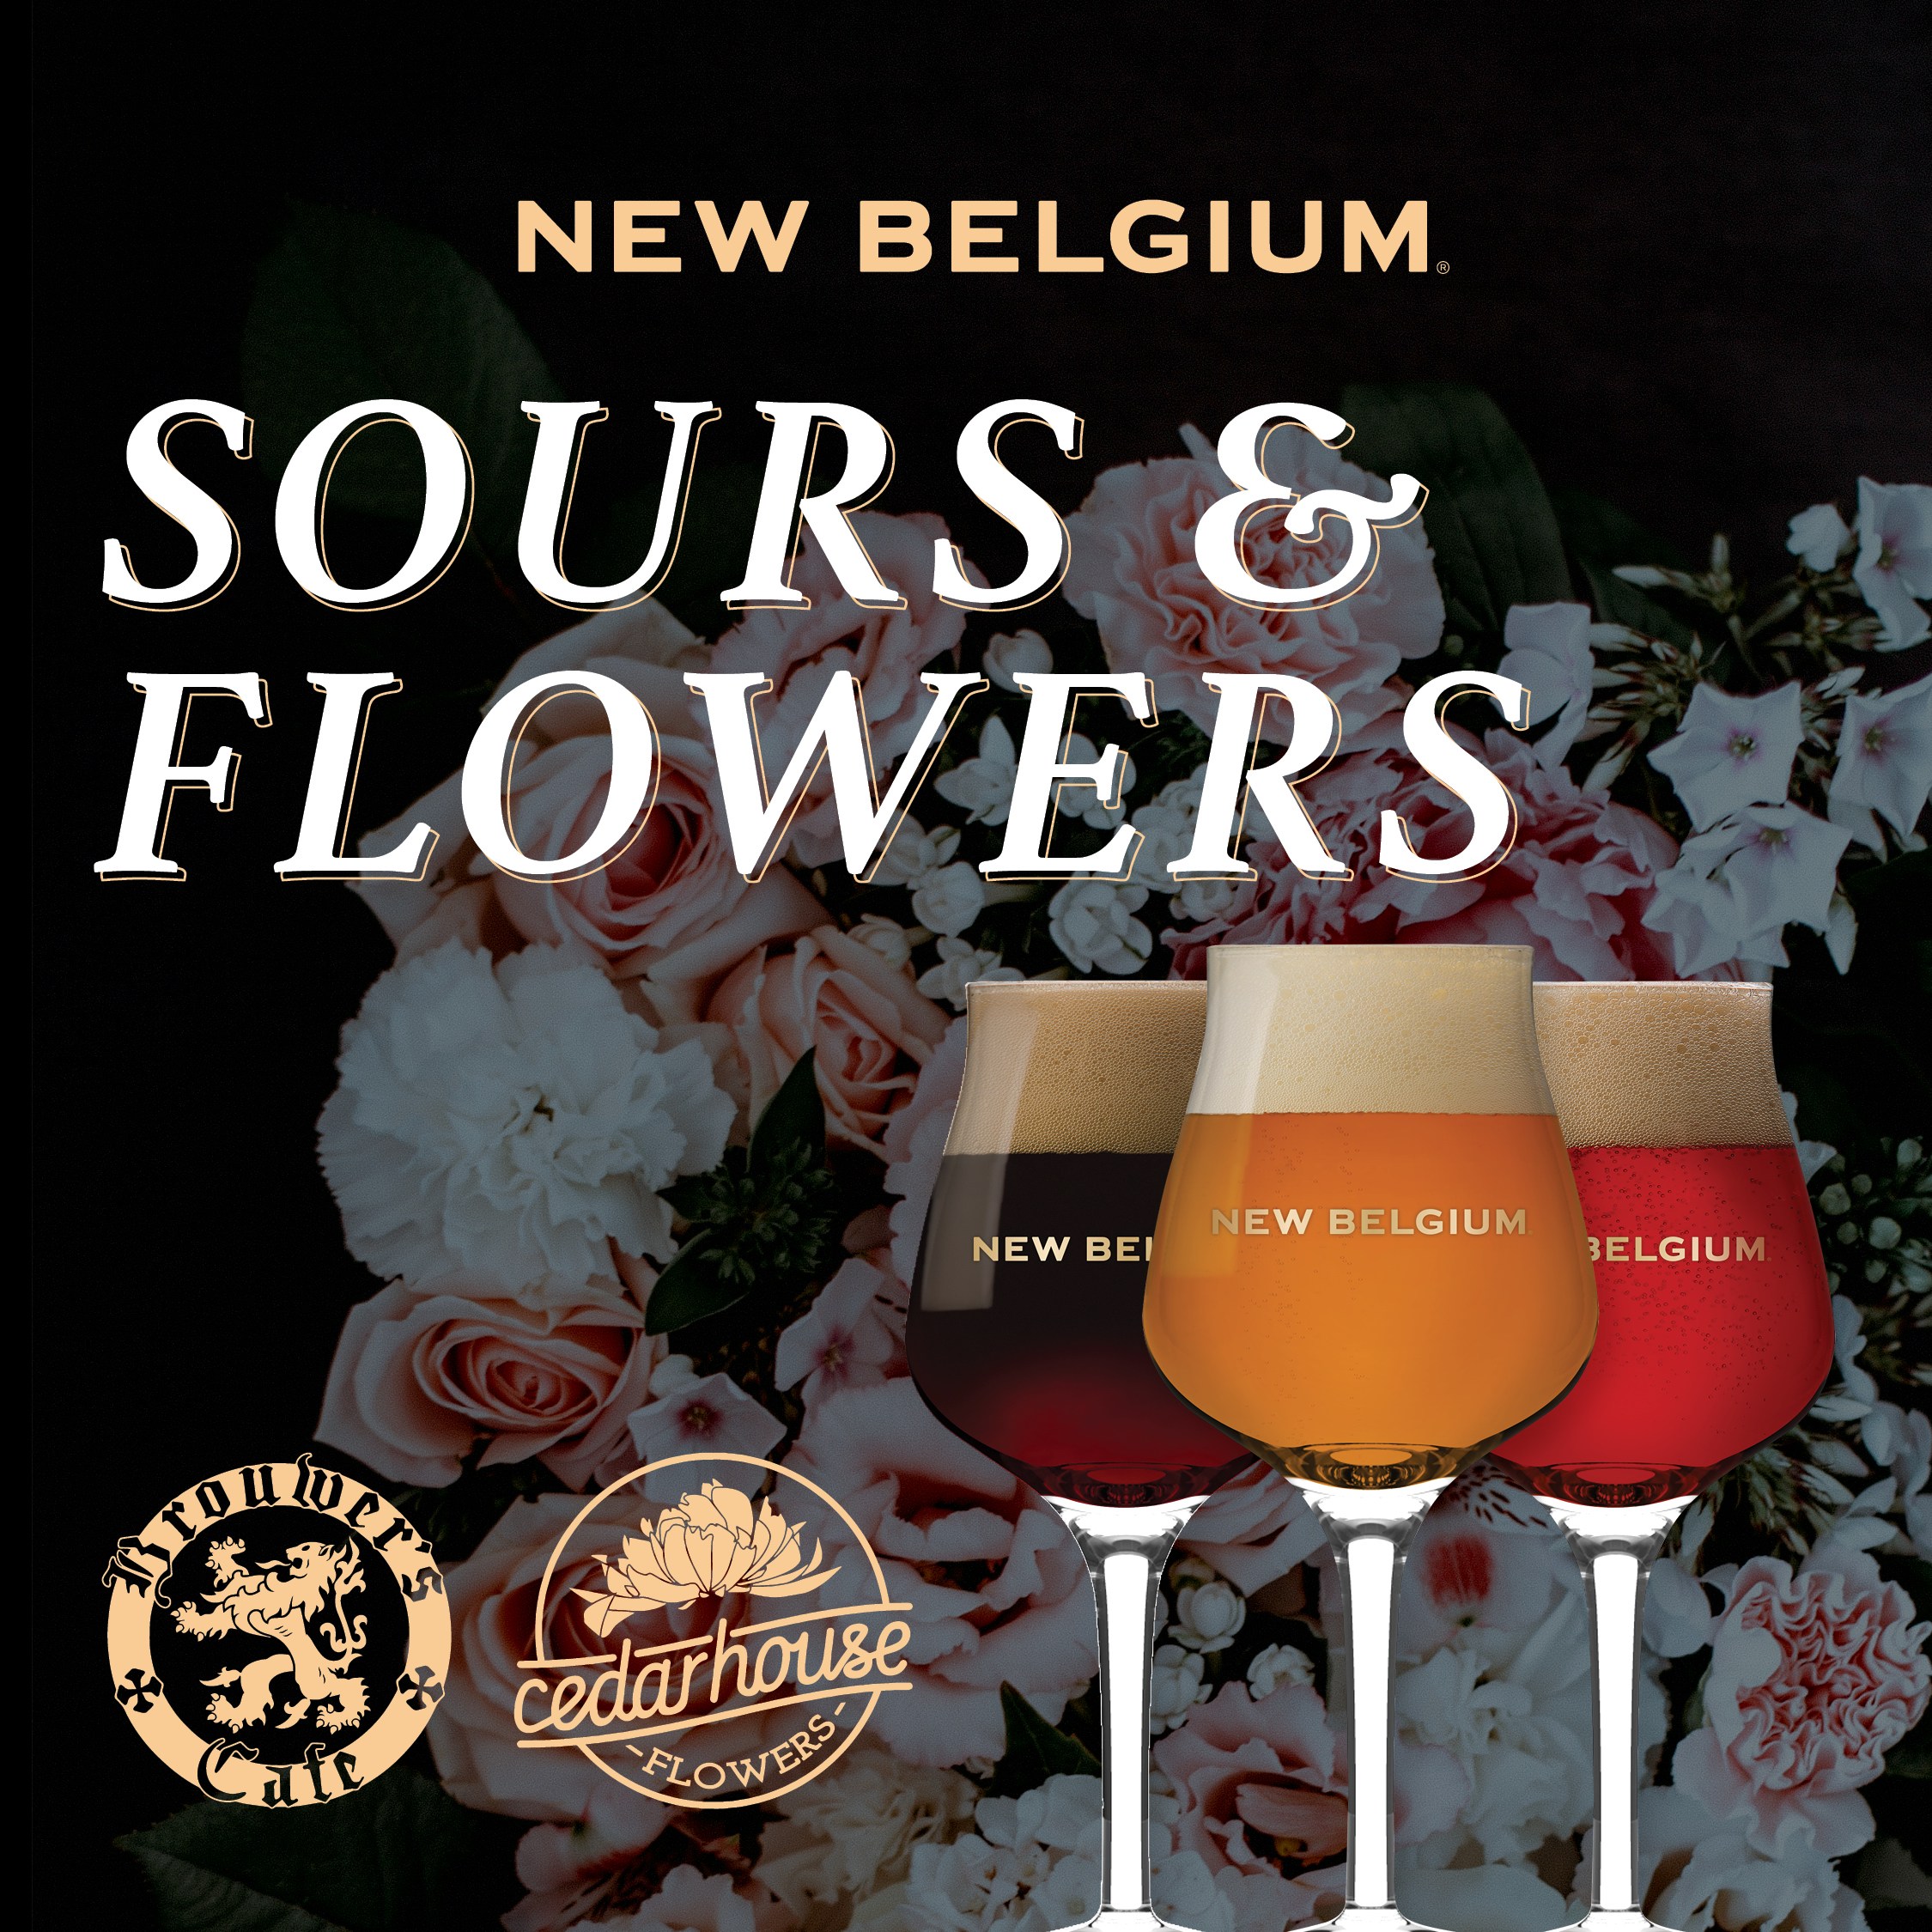 Saturday, July 20th @ 2pm Sours & Flowers @ Brouwer’s with New Belgium